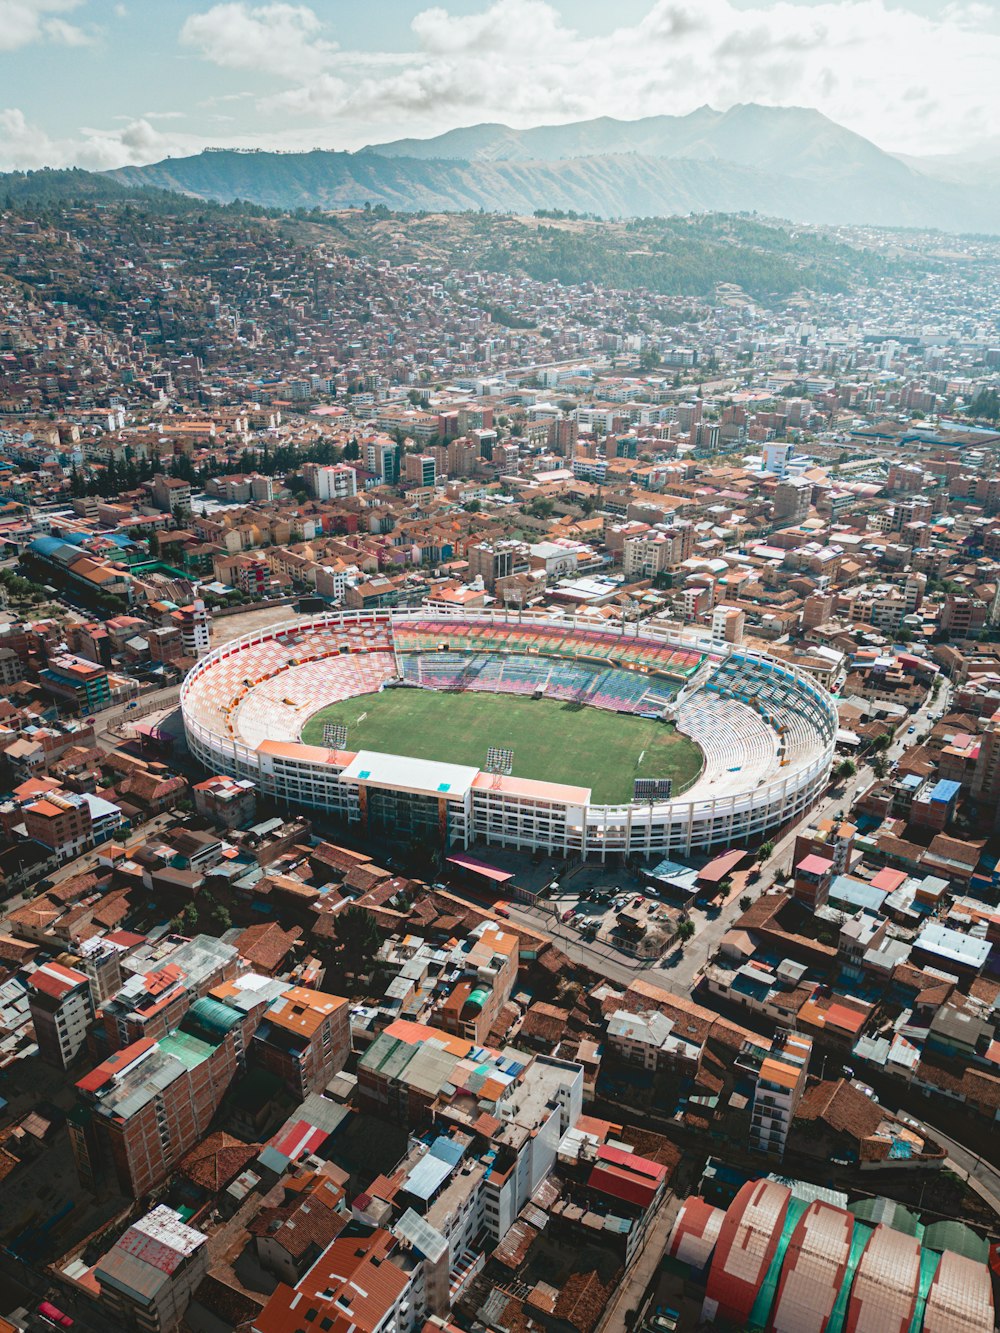 an aerial view of a soccer stadium in a city